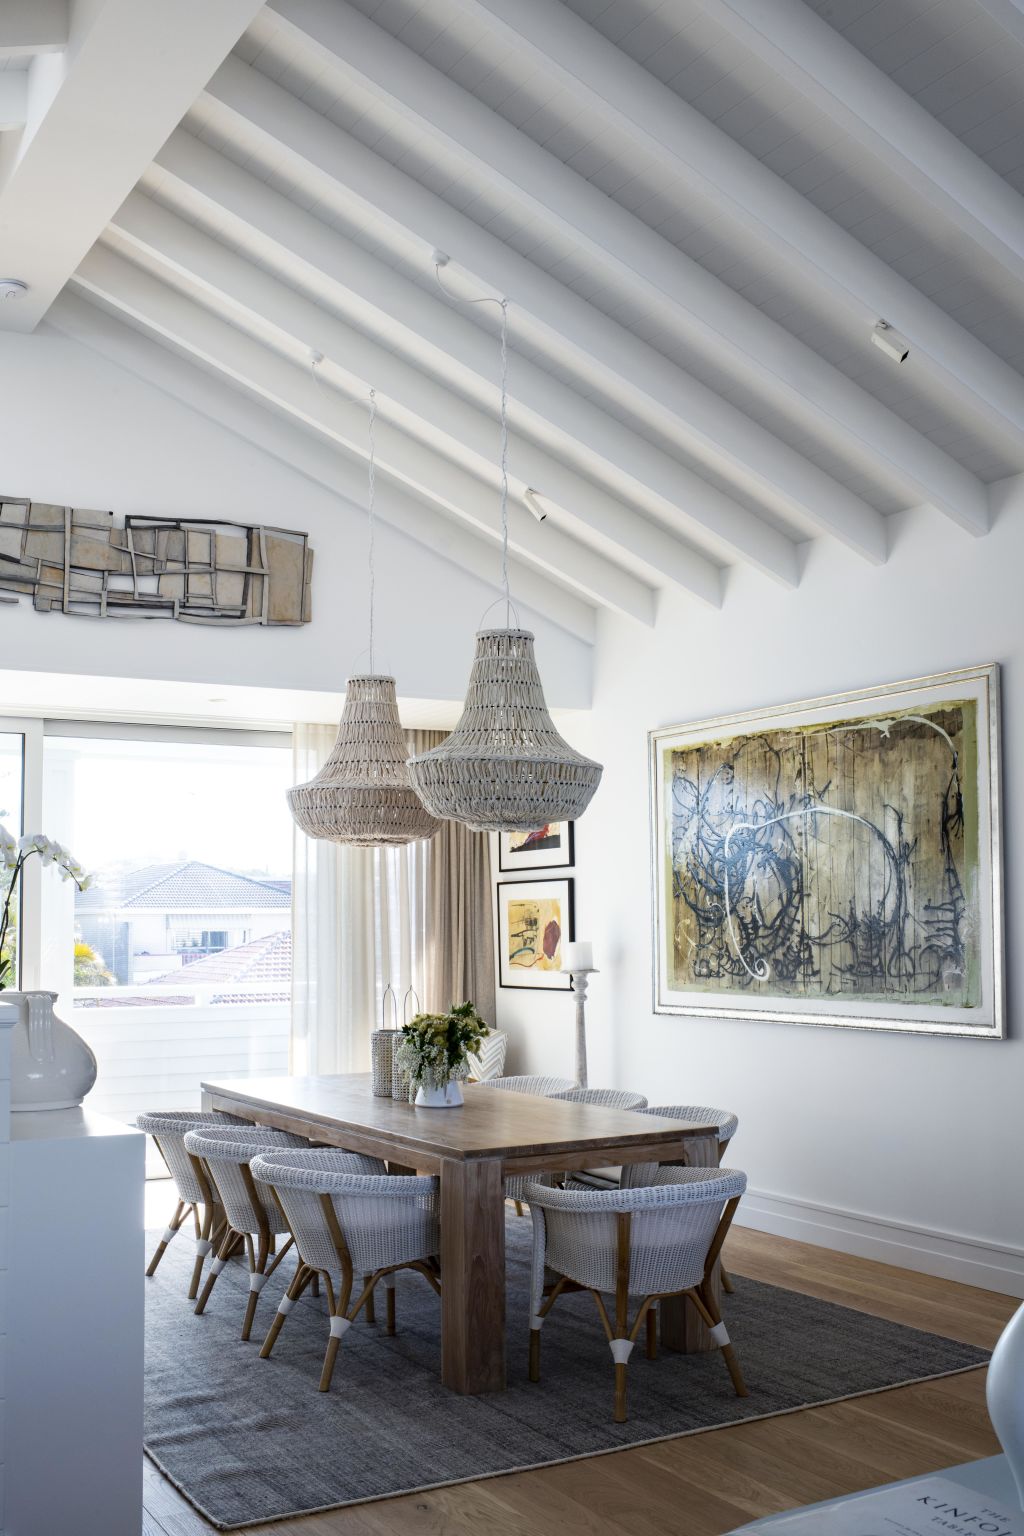 The dining space. Photo: James Hardie